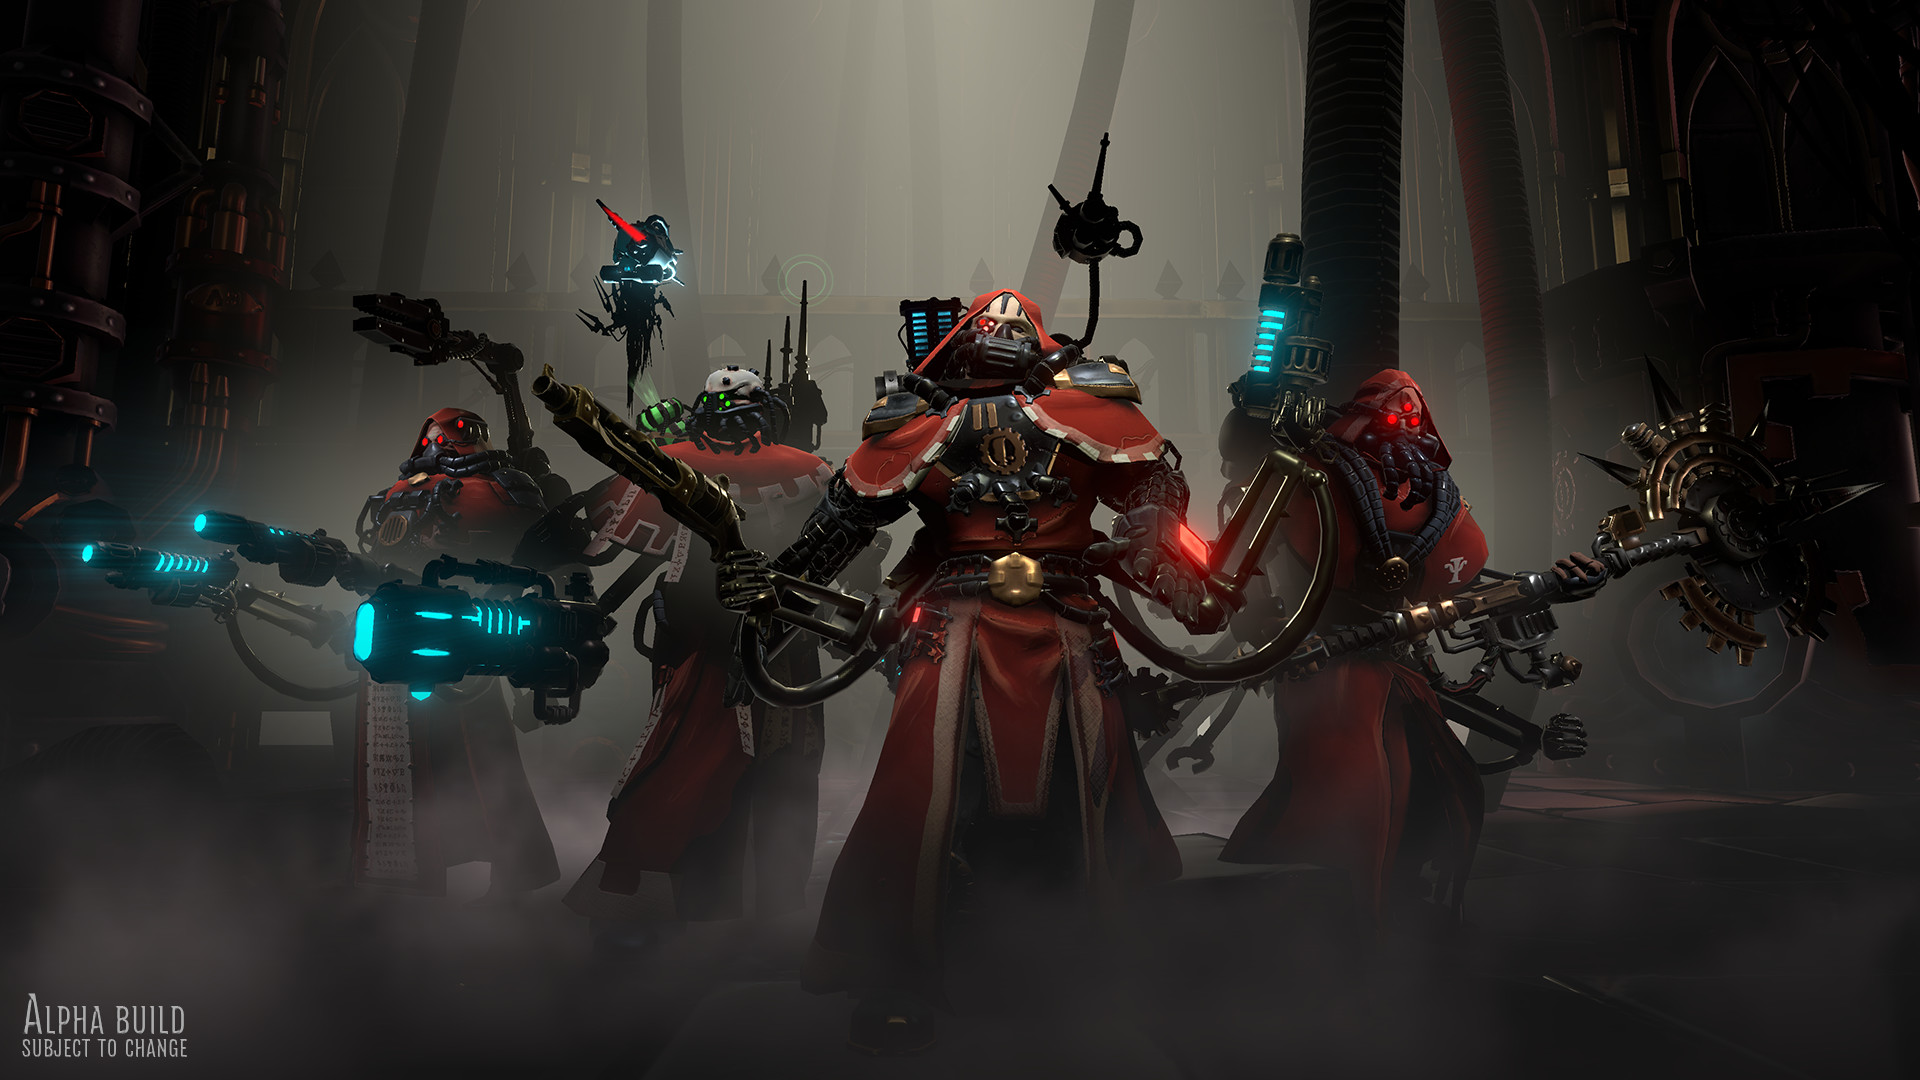 Warhammer 000: Mechanicus Is A New Turn Based Tactical Game Due In 2018 On PC